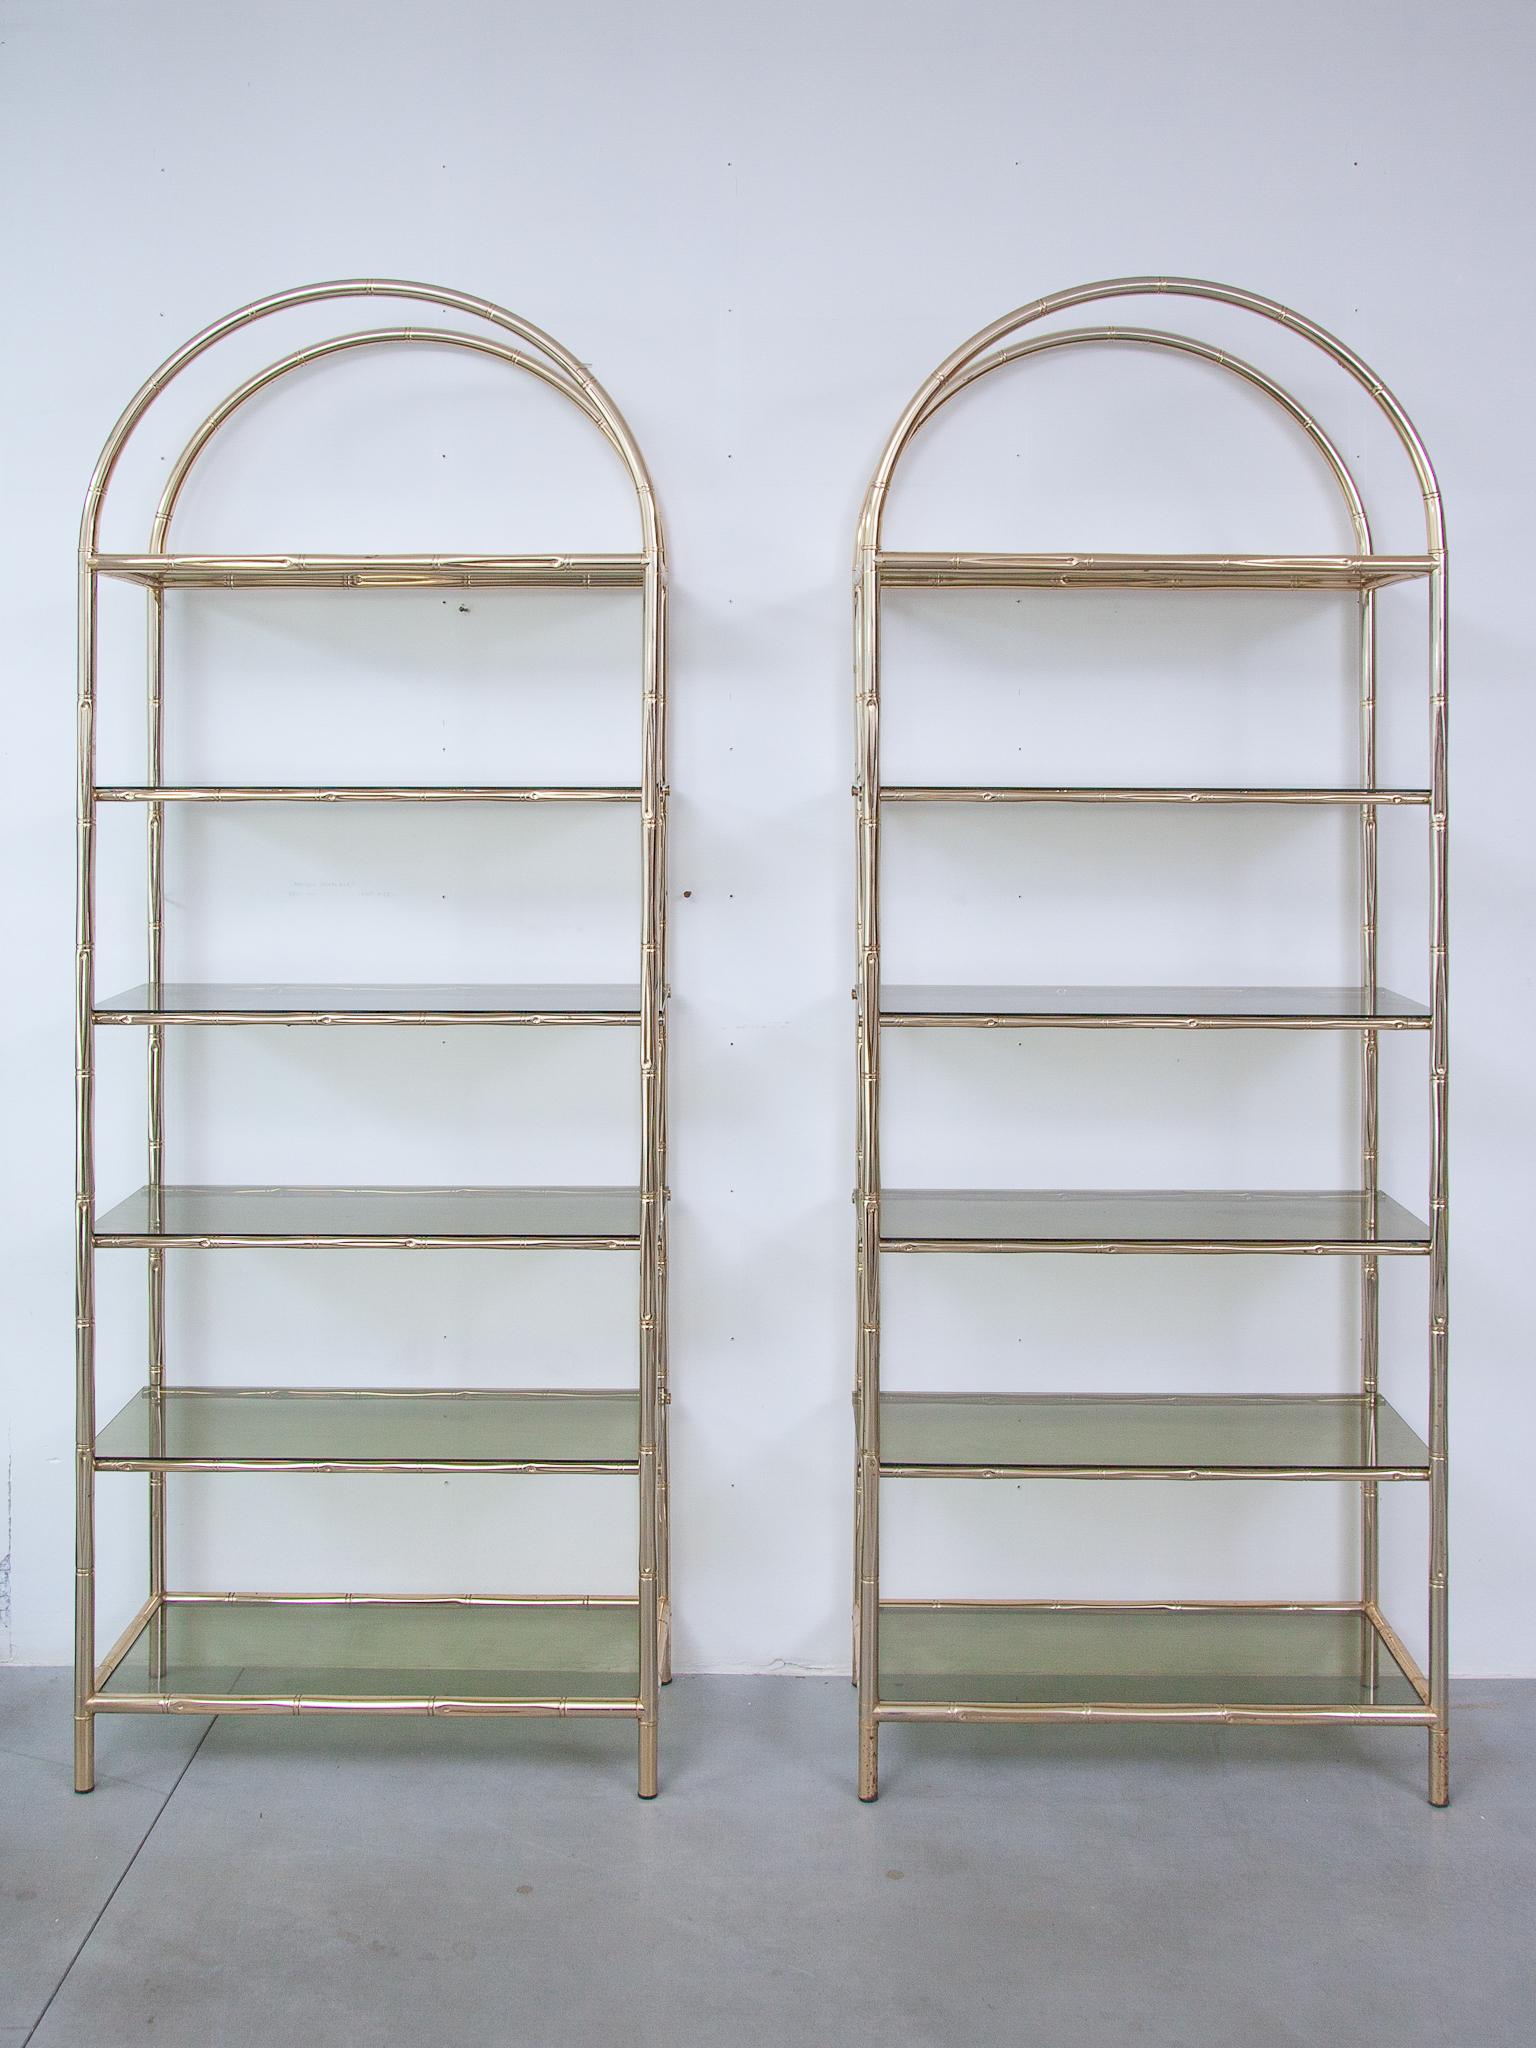 The set of two faux bamboo etageres are unique pieces of furniture that combines classic brass with a touch of nature. With sturdy legs, crafted to resemble bamboo canes, add a touch of organic charm to the piece. The fume glass shelves provides a